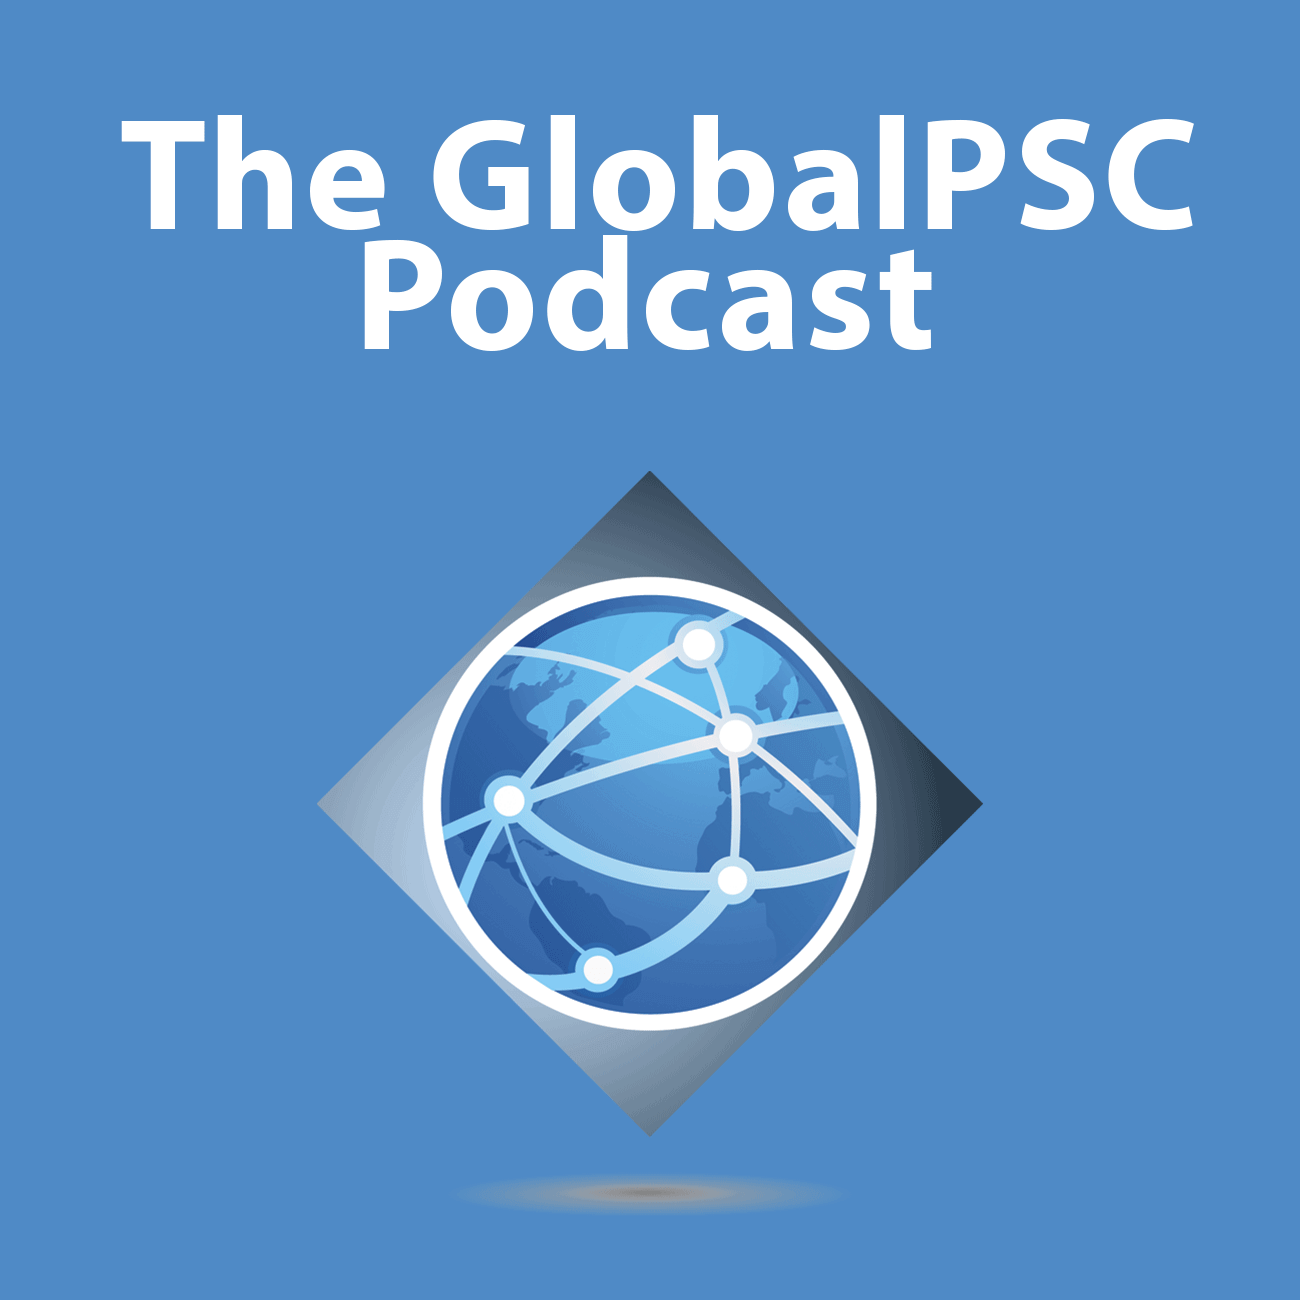 New GlobalPSC Podcast on Solar Products and Banning WEEE from Landfill